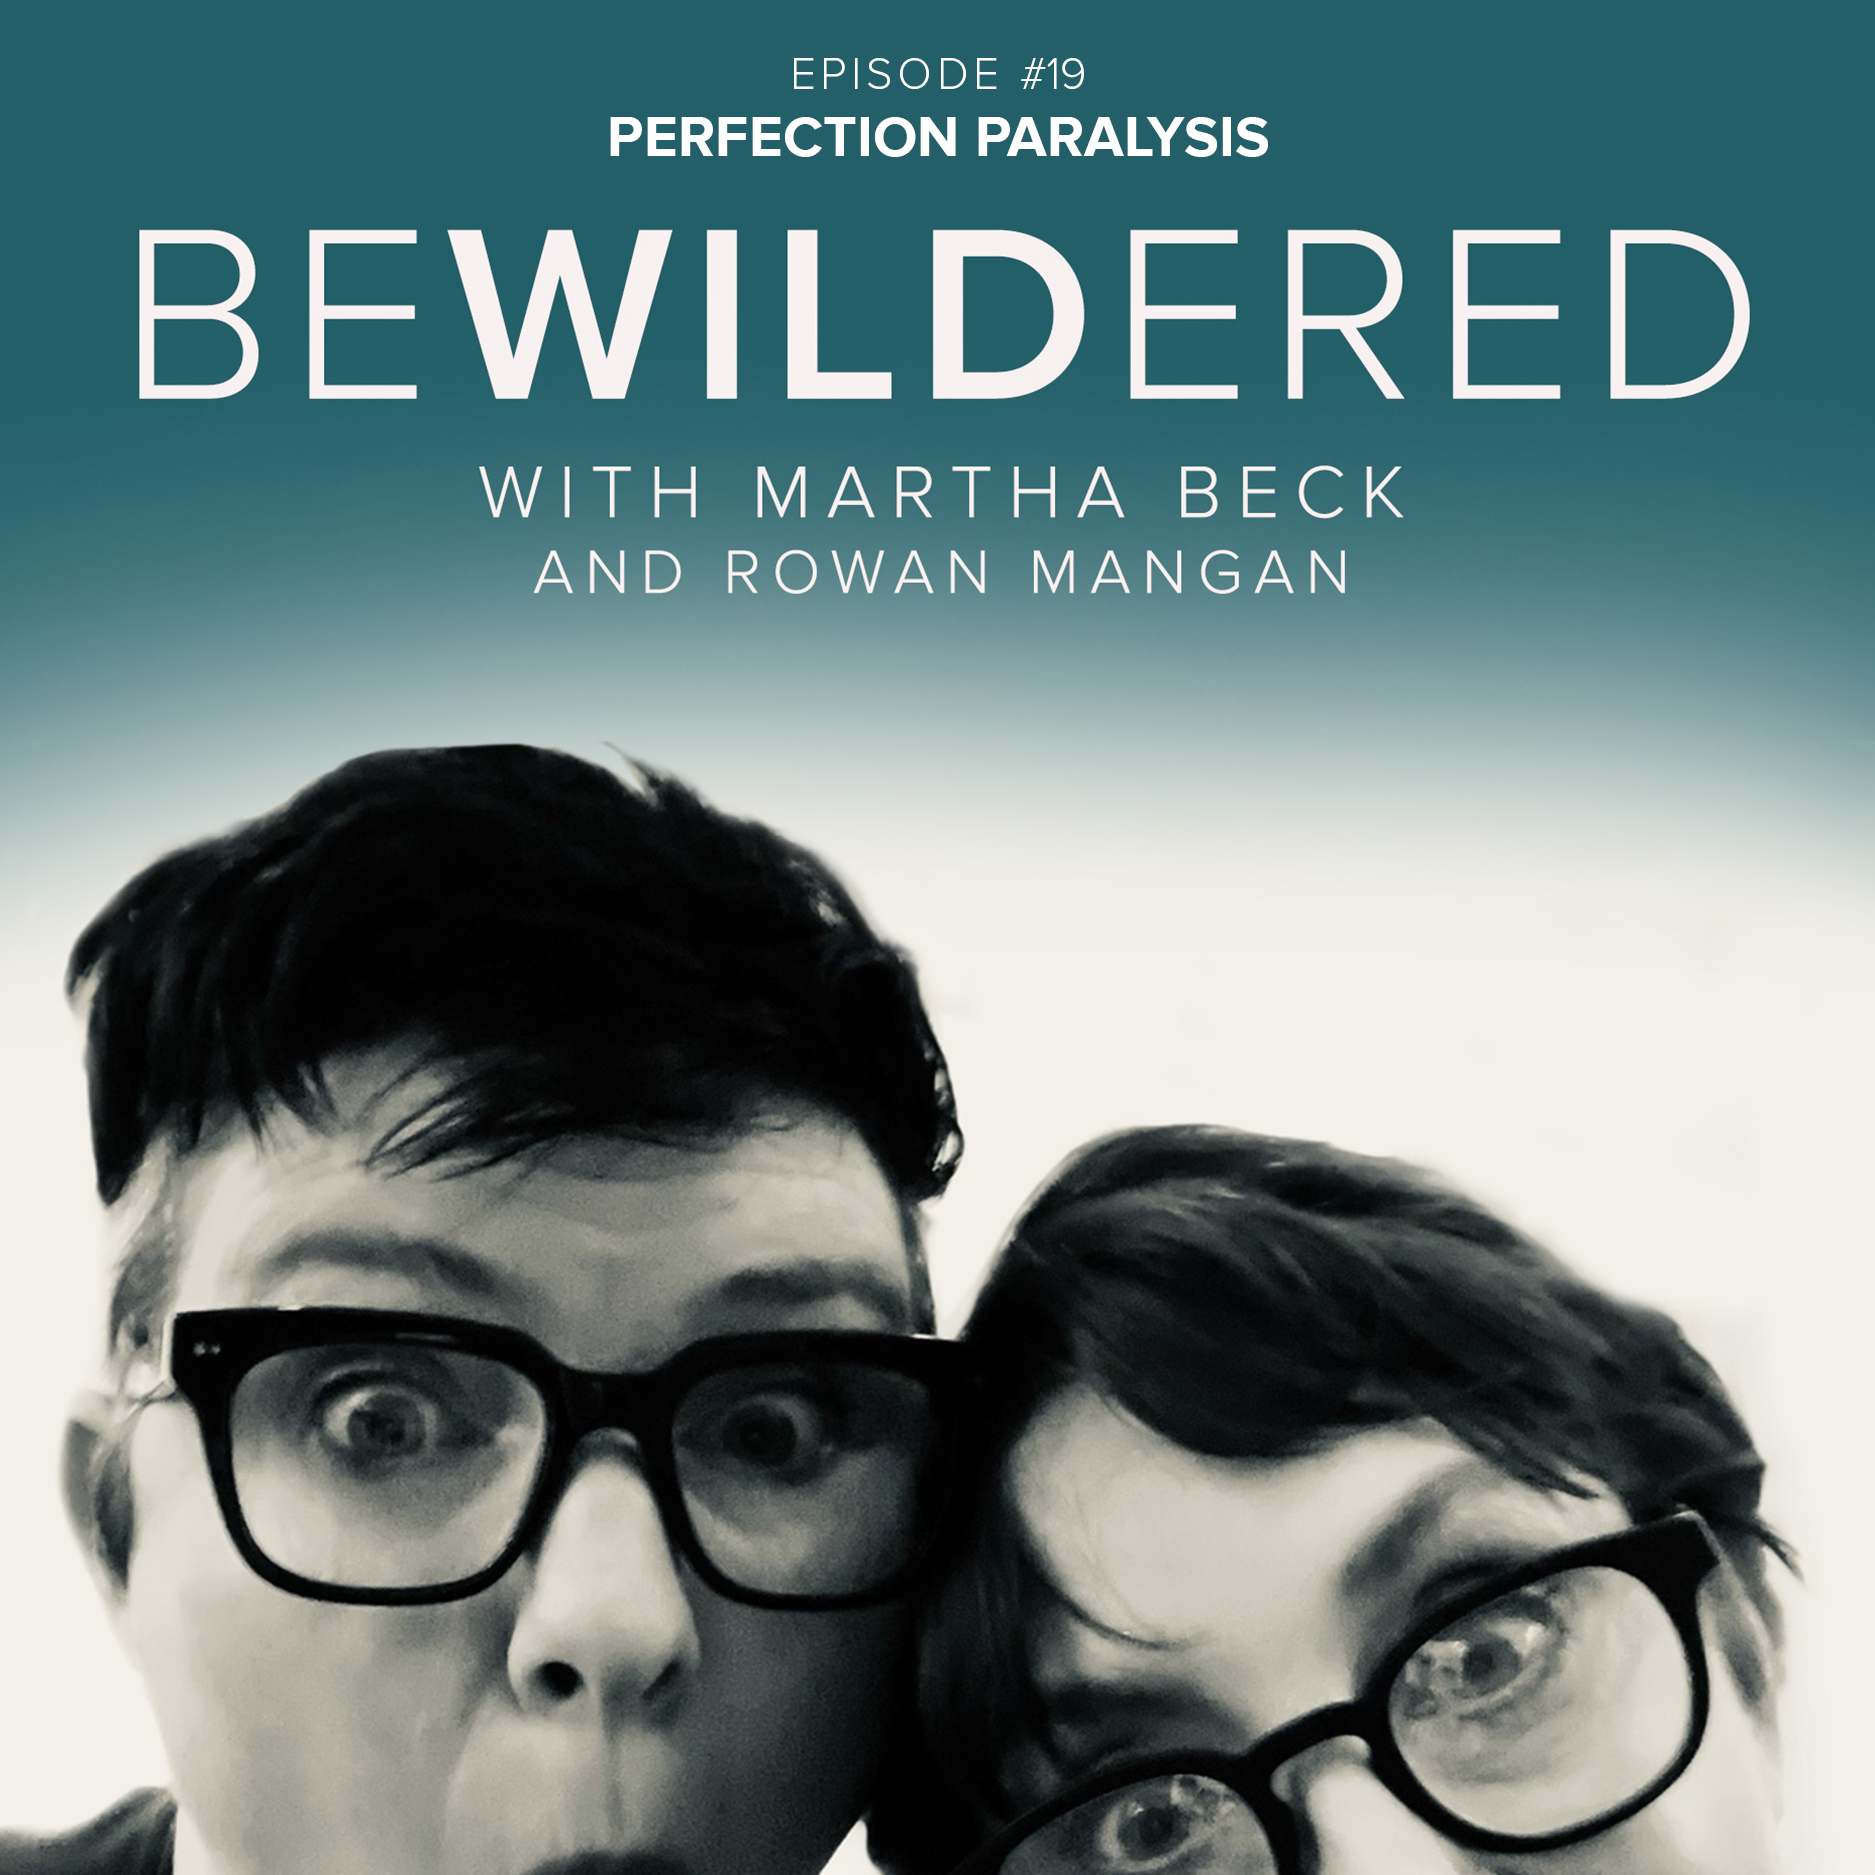 Image for Episode #19 Perfection Paralysis for the Bewildered Podcast with Martha Beck and Rowan Mangan